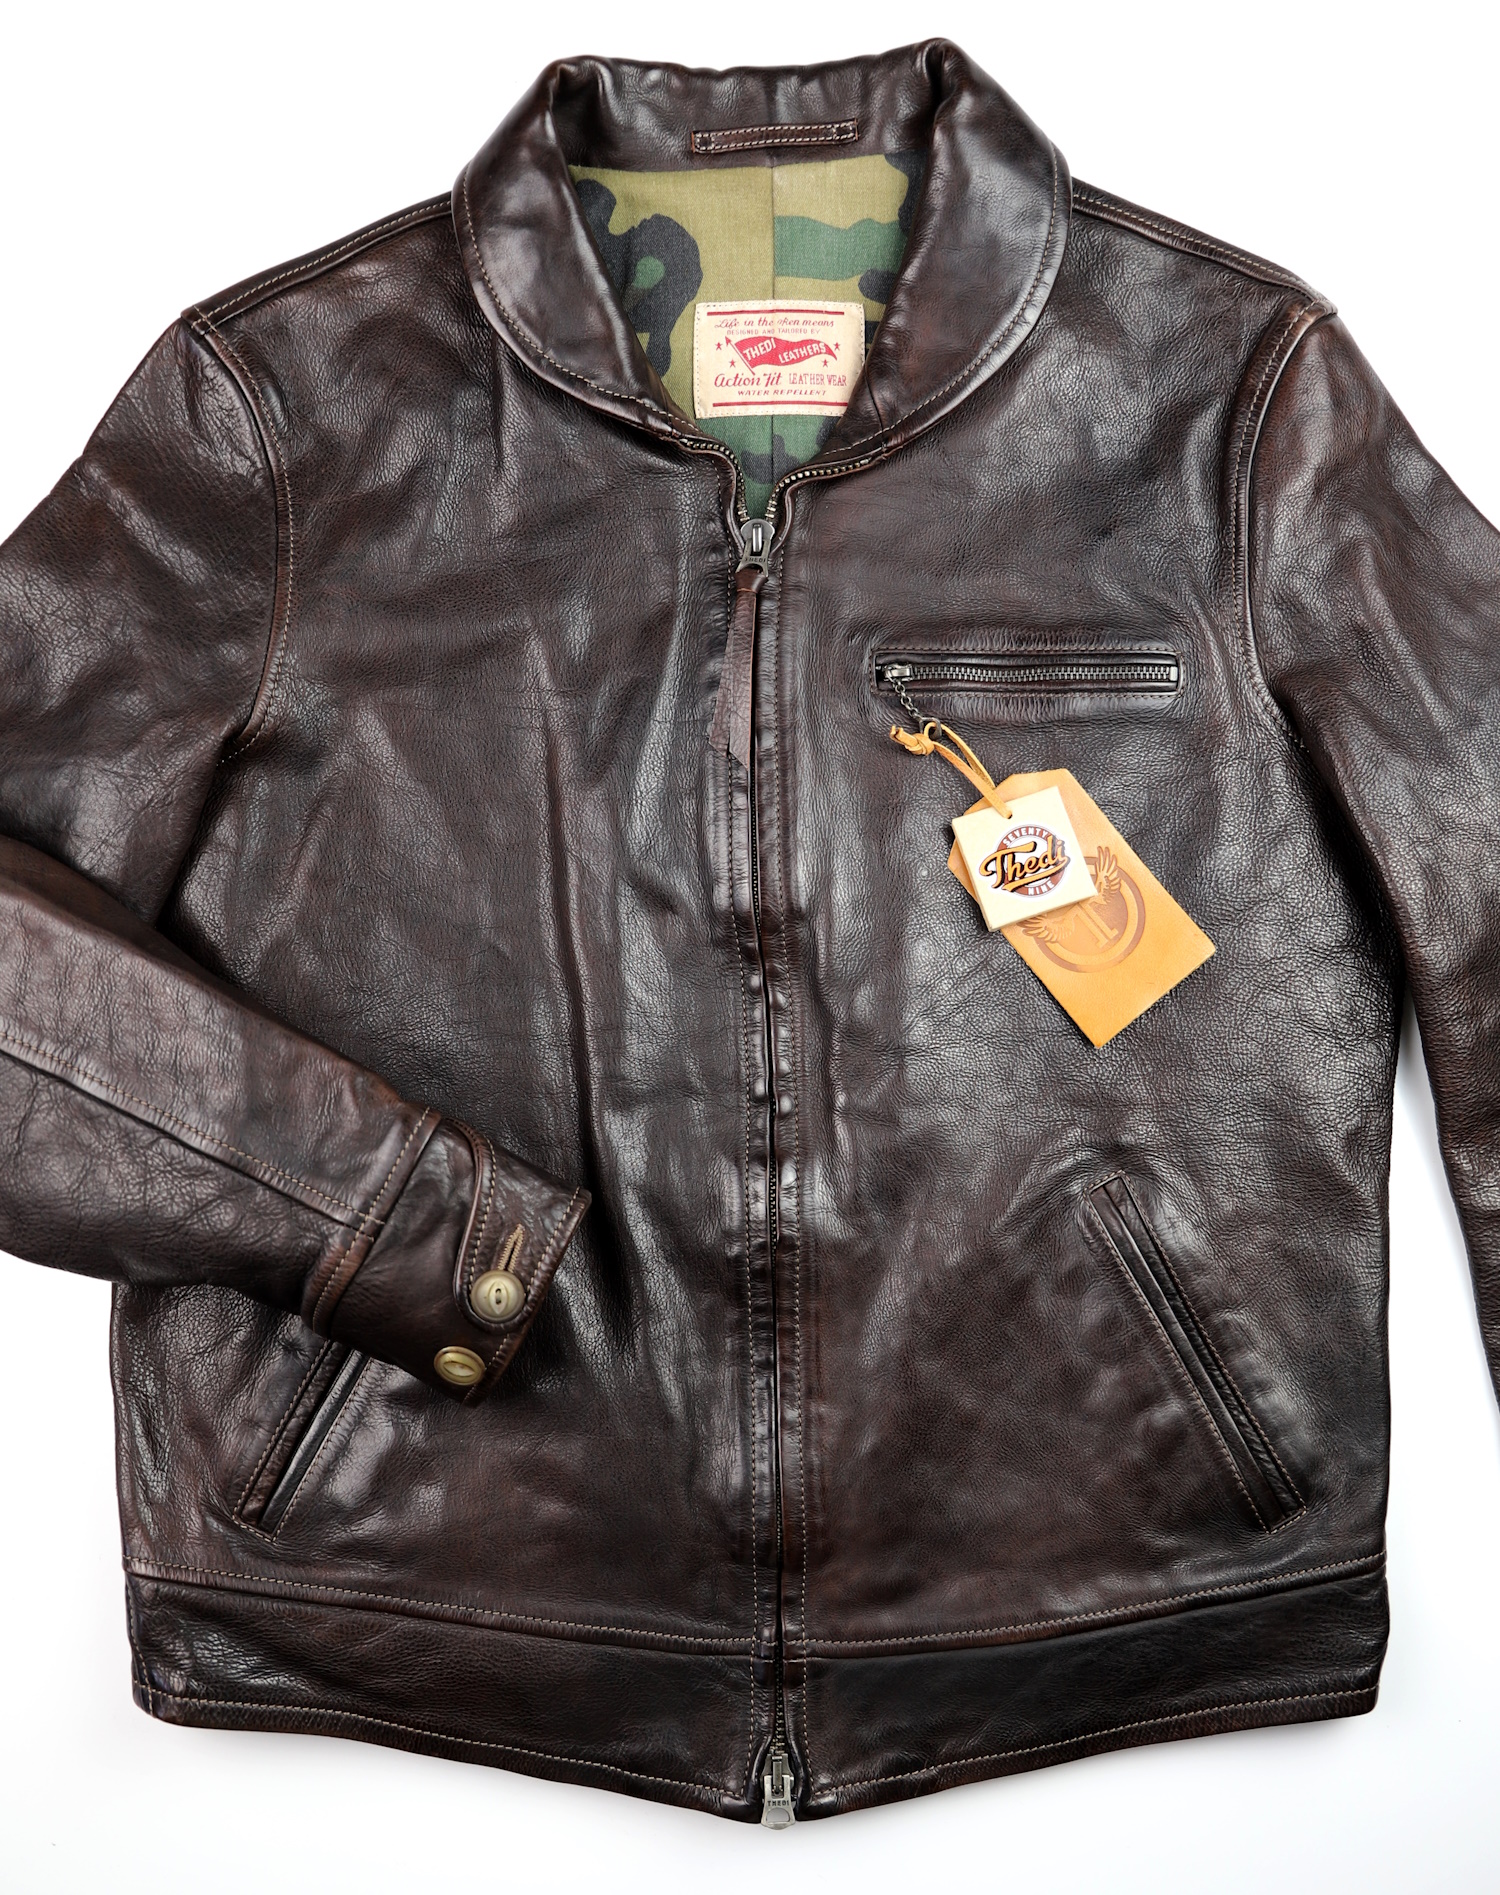 Thedi Markos Zip-Up Shawl Collar Brown Canneto Cowhide 2XL1 front.jpg